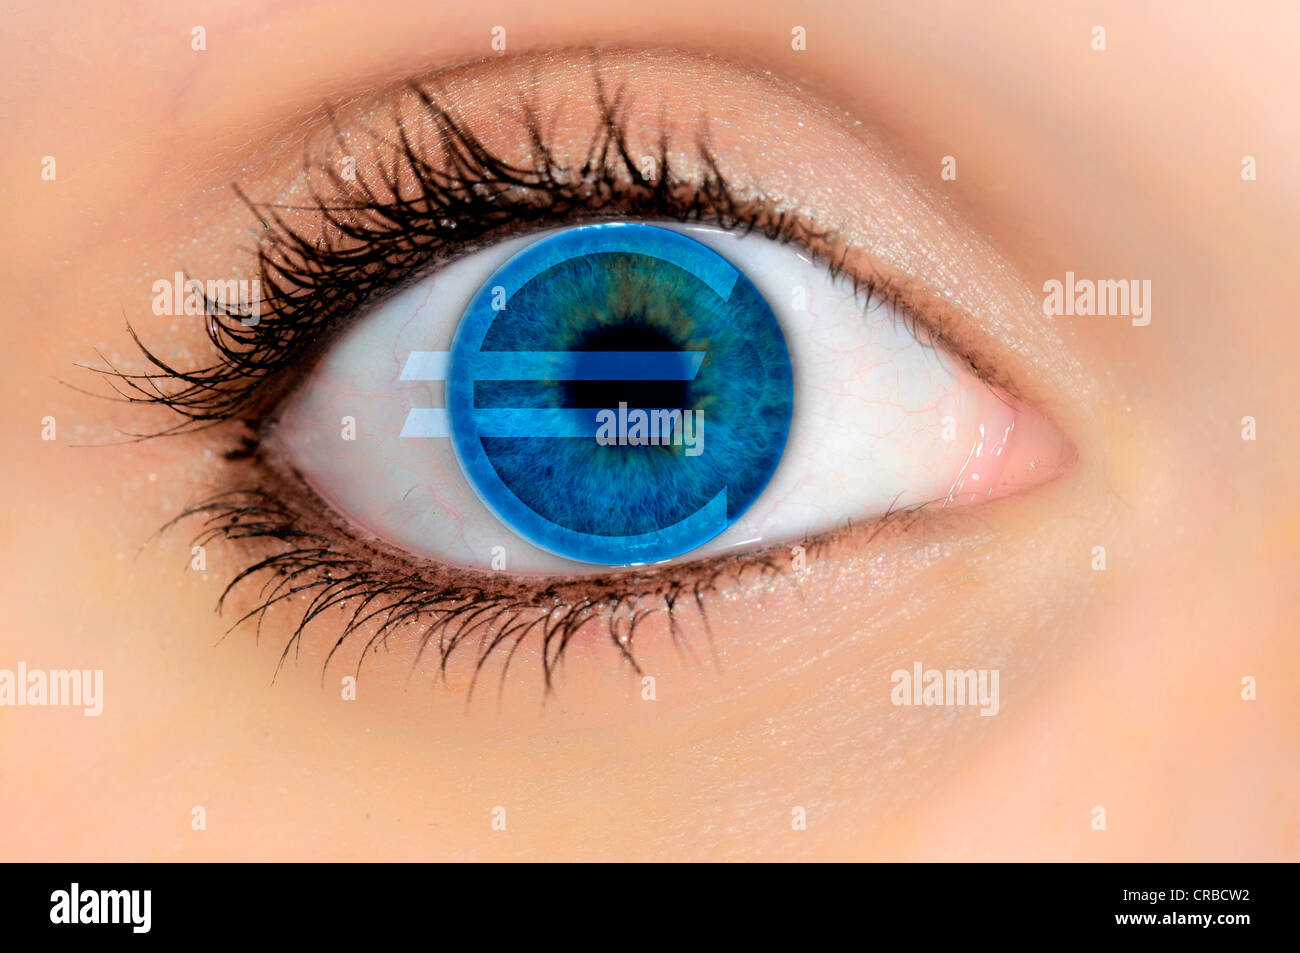 Detailed view of an eye with a euro symbol, symbolic image for greed for money Stock Photo